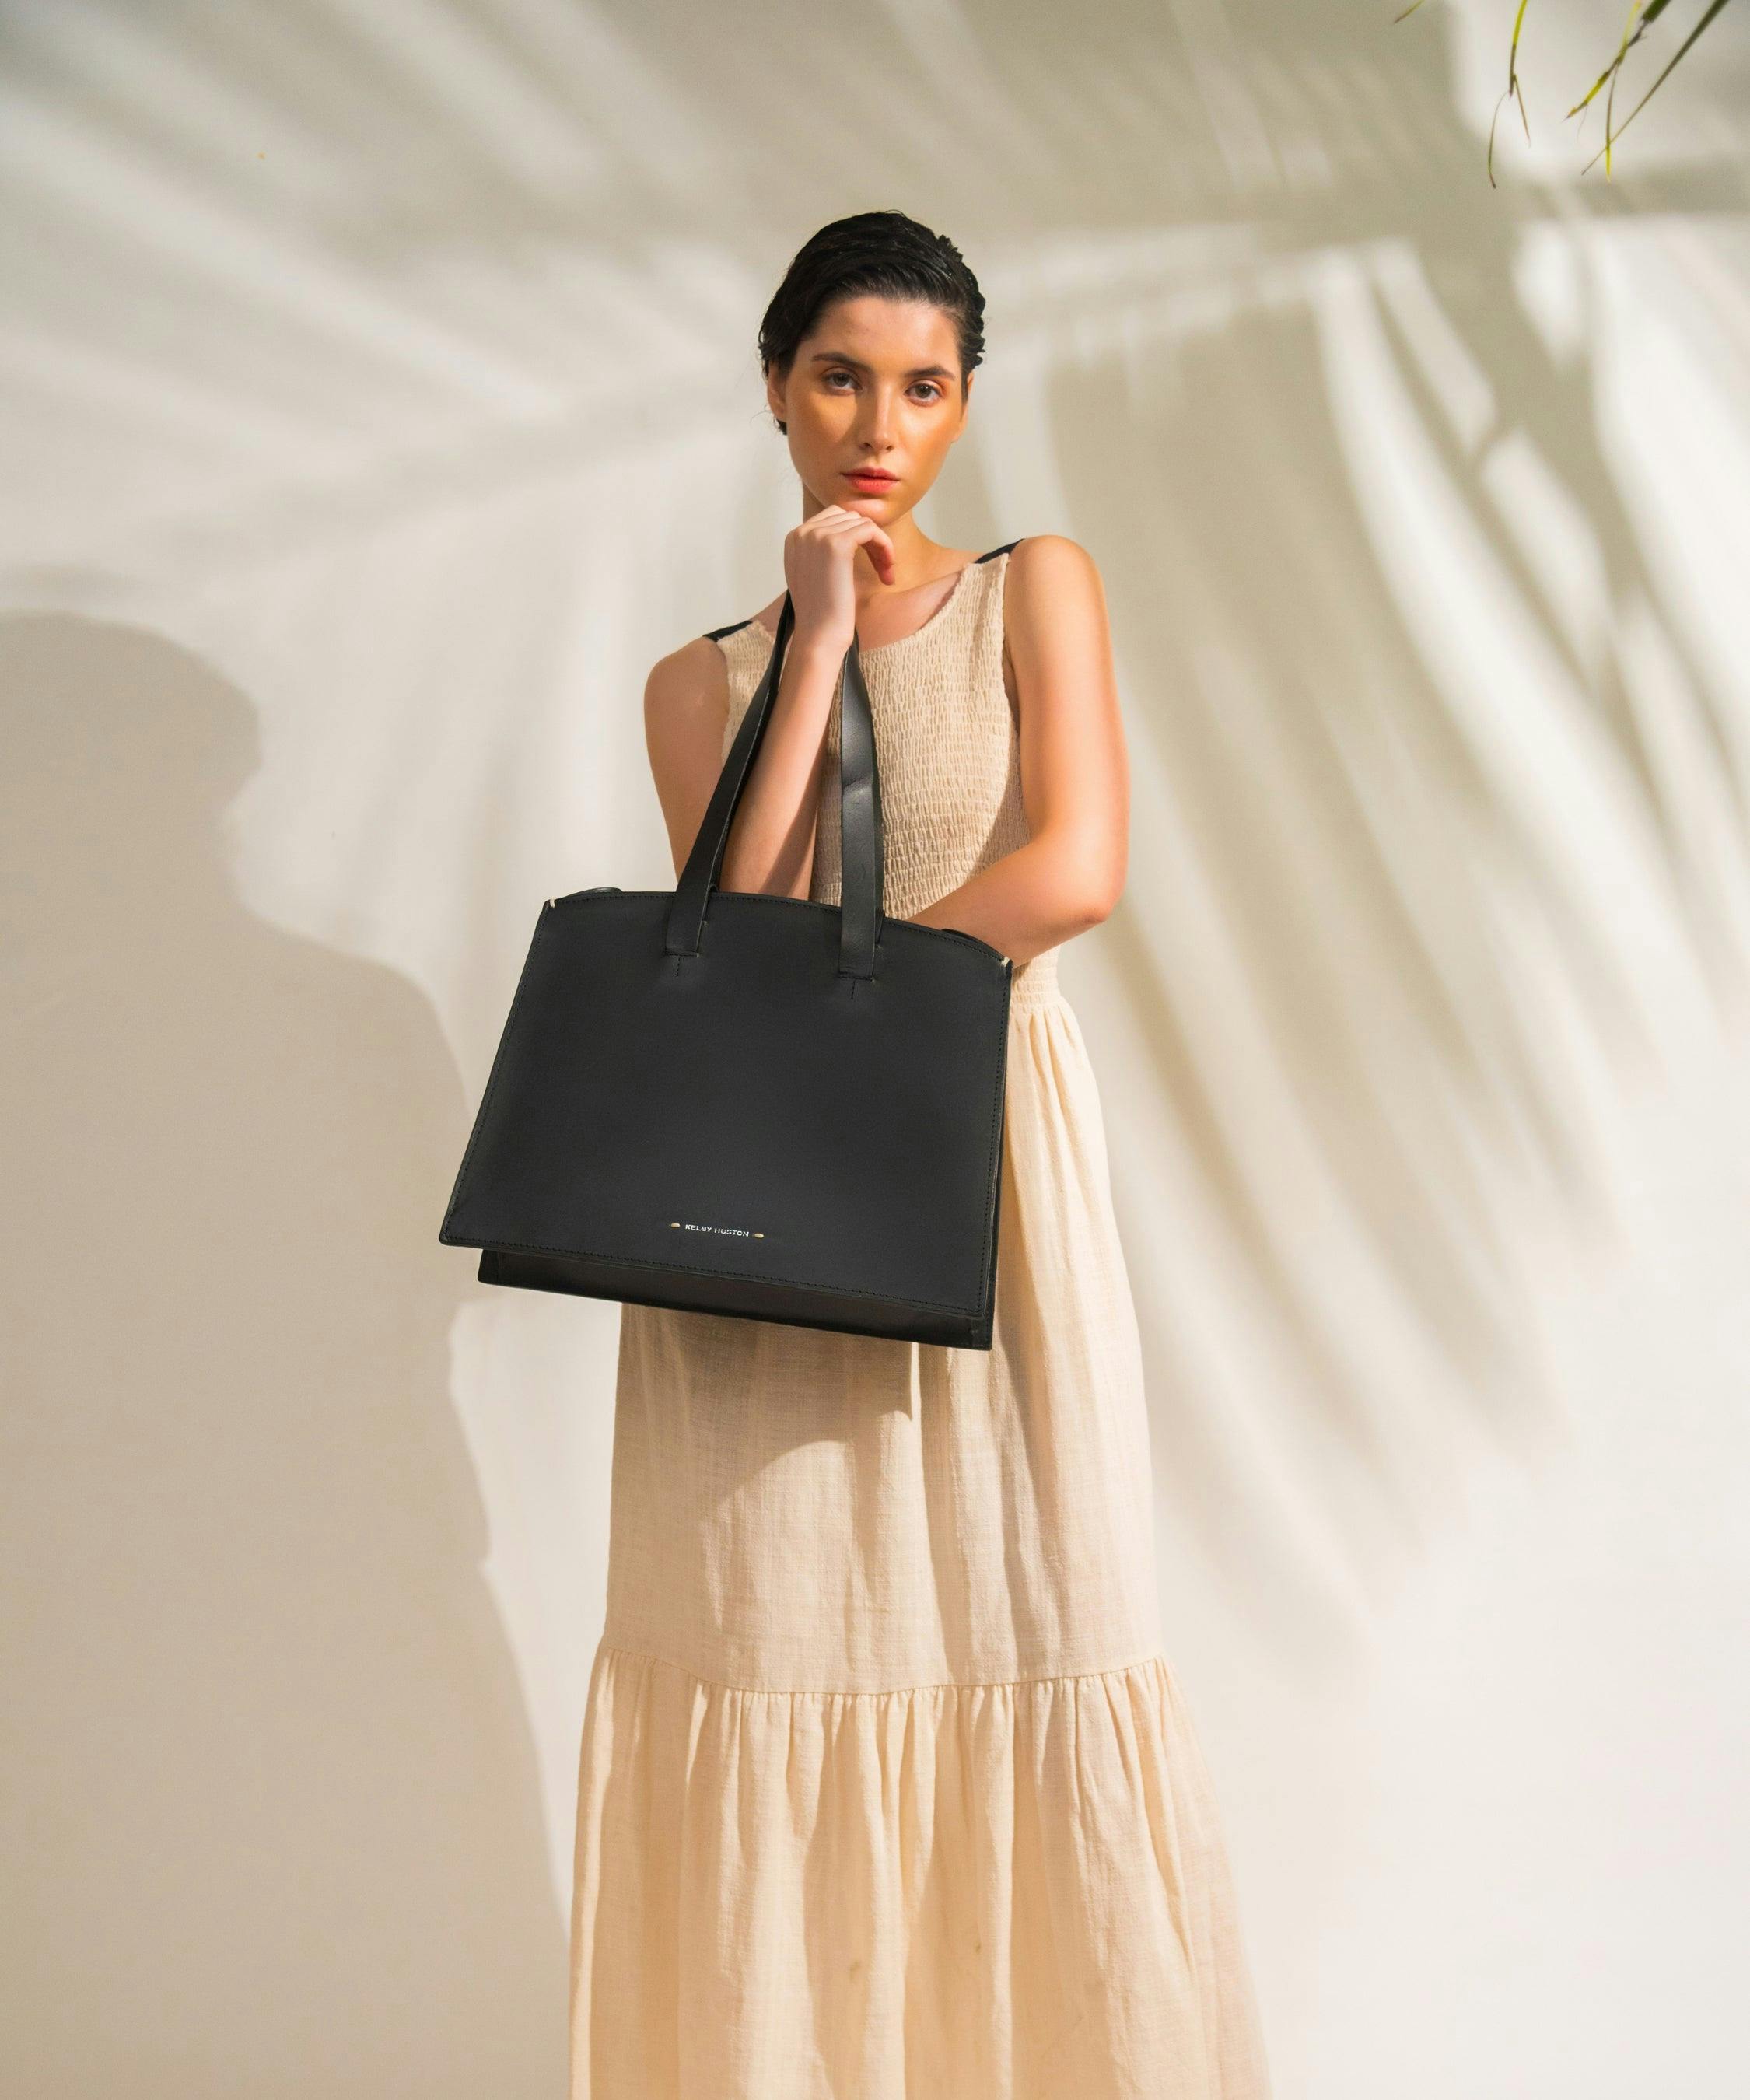 Terra Structured Tote - Black, a product by Kelby Huston